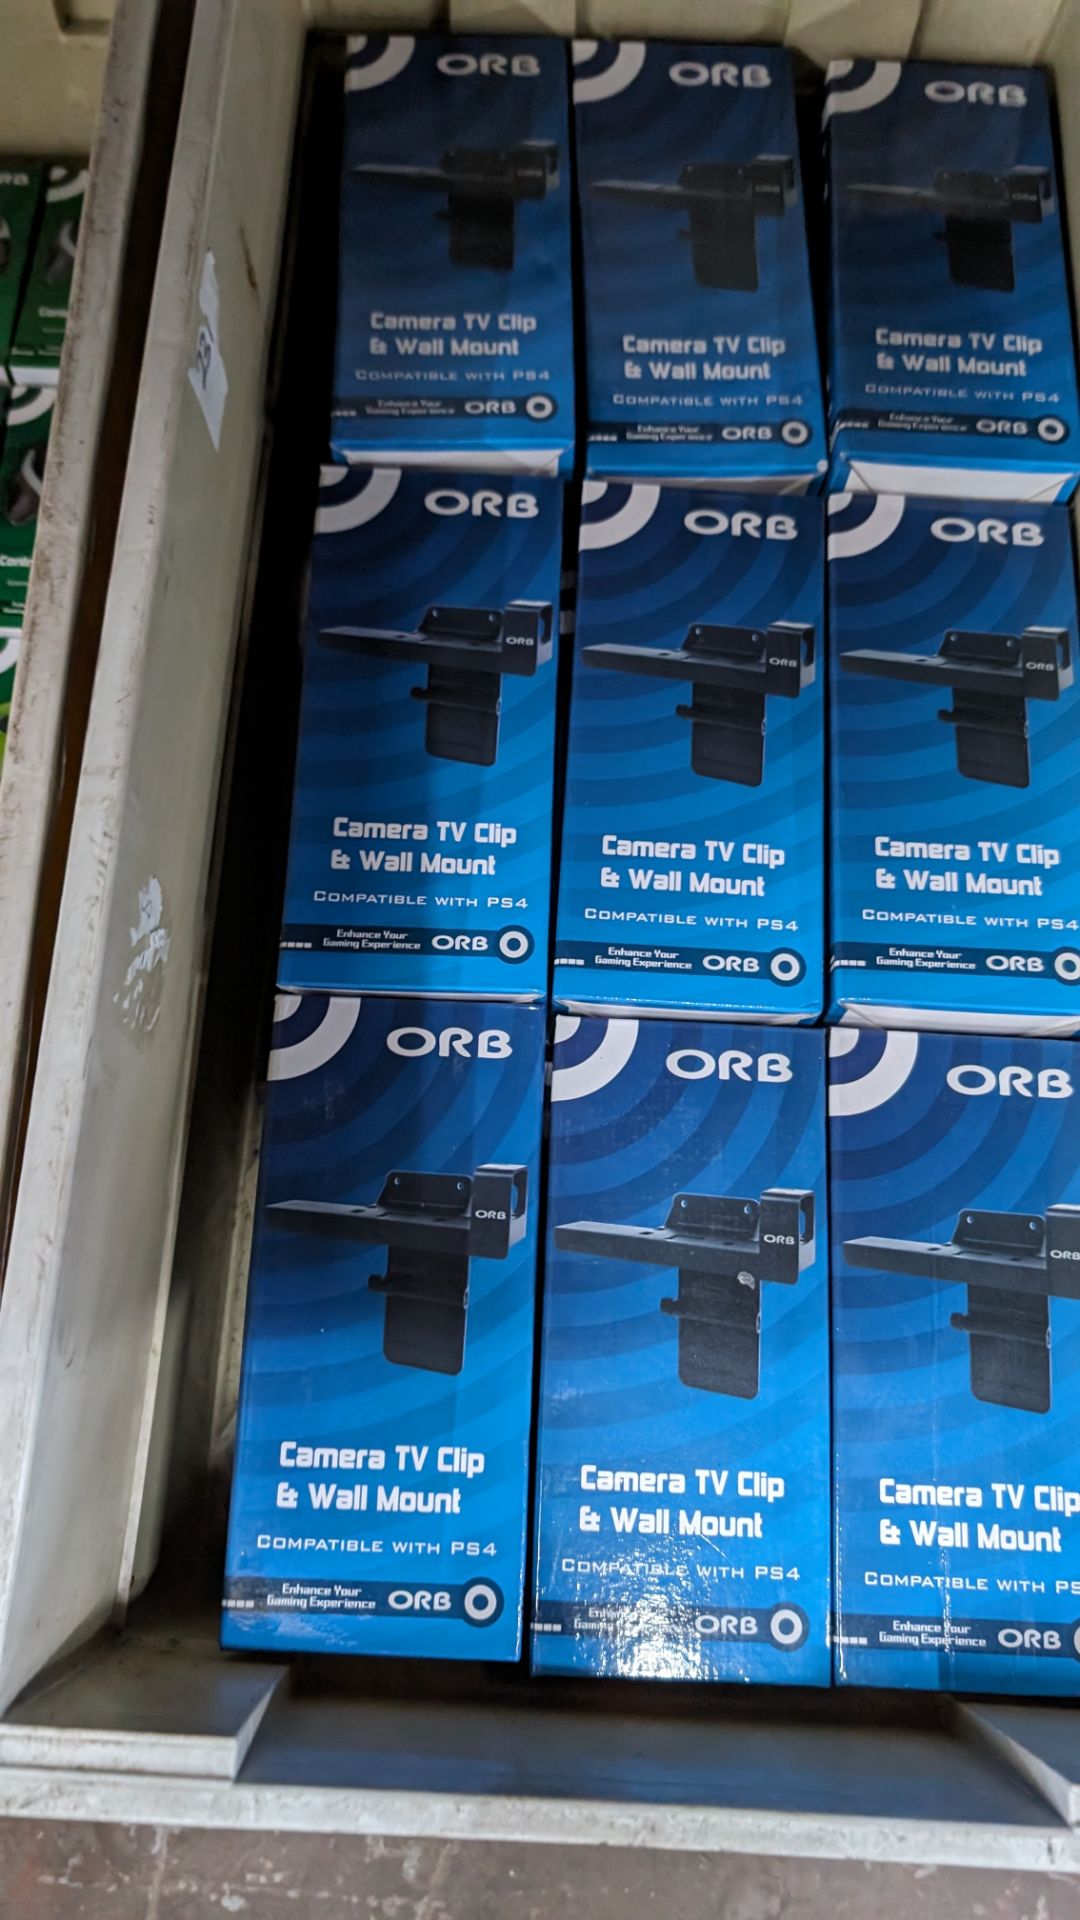 18 off Orb camera TV clip/wall mount packs for PS4 - Image 4 of 4